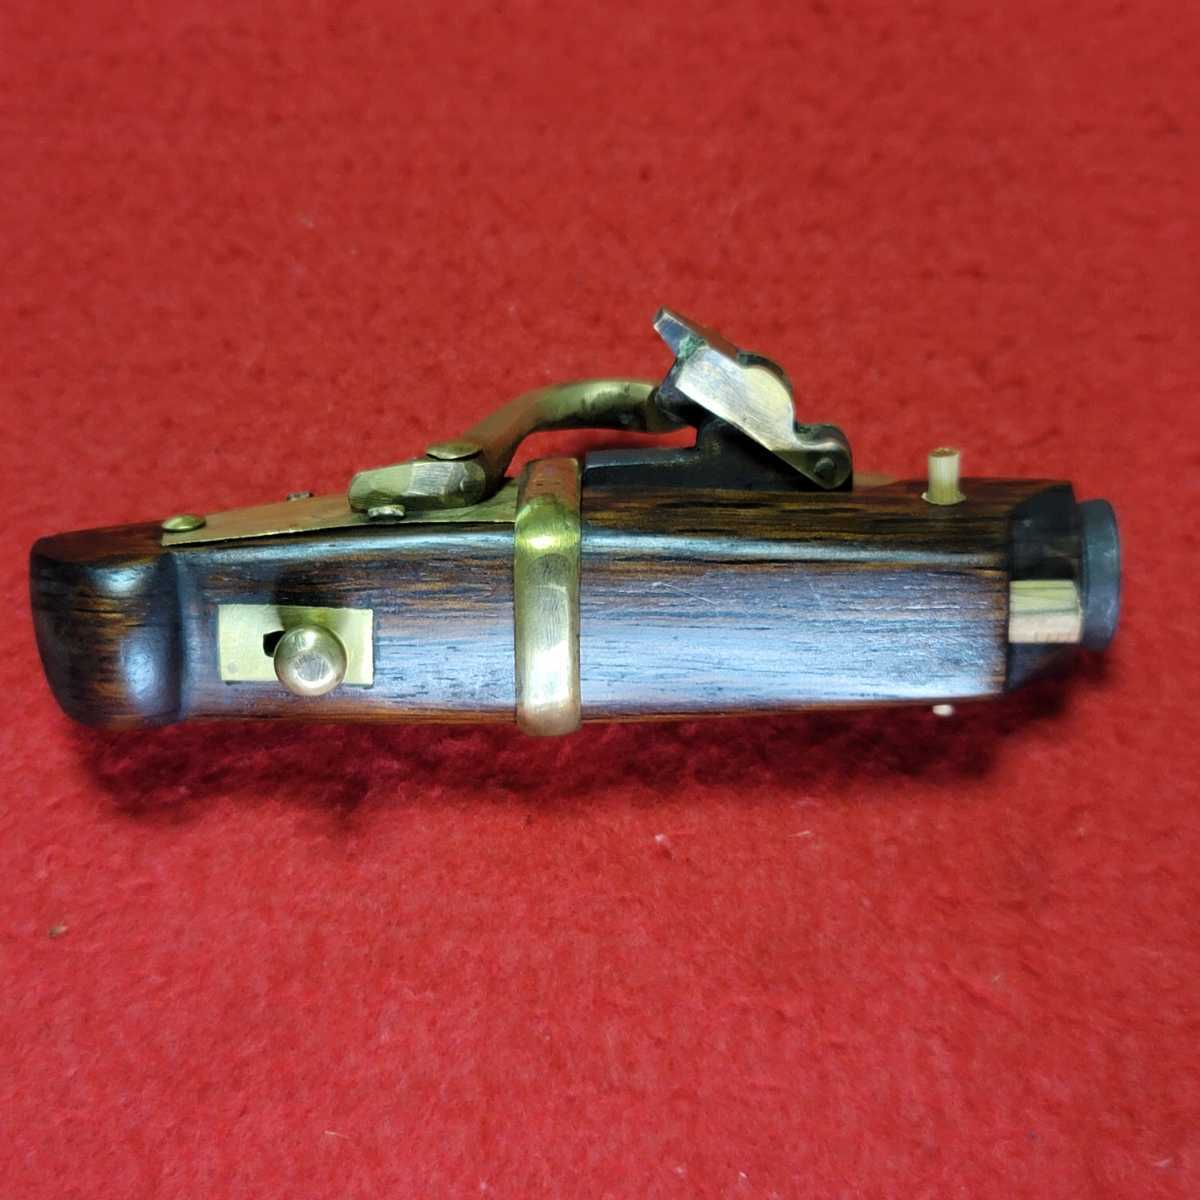 # genuine rice field # matchlock # netsuke # mechanism . movement. # disassembly . is possible to do #10.6cm# armor, old style gun, gun, netsuke, genuine rice field .., genuine rice field confidence ., genuine rice field Masayuki #B267